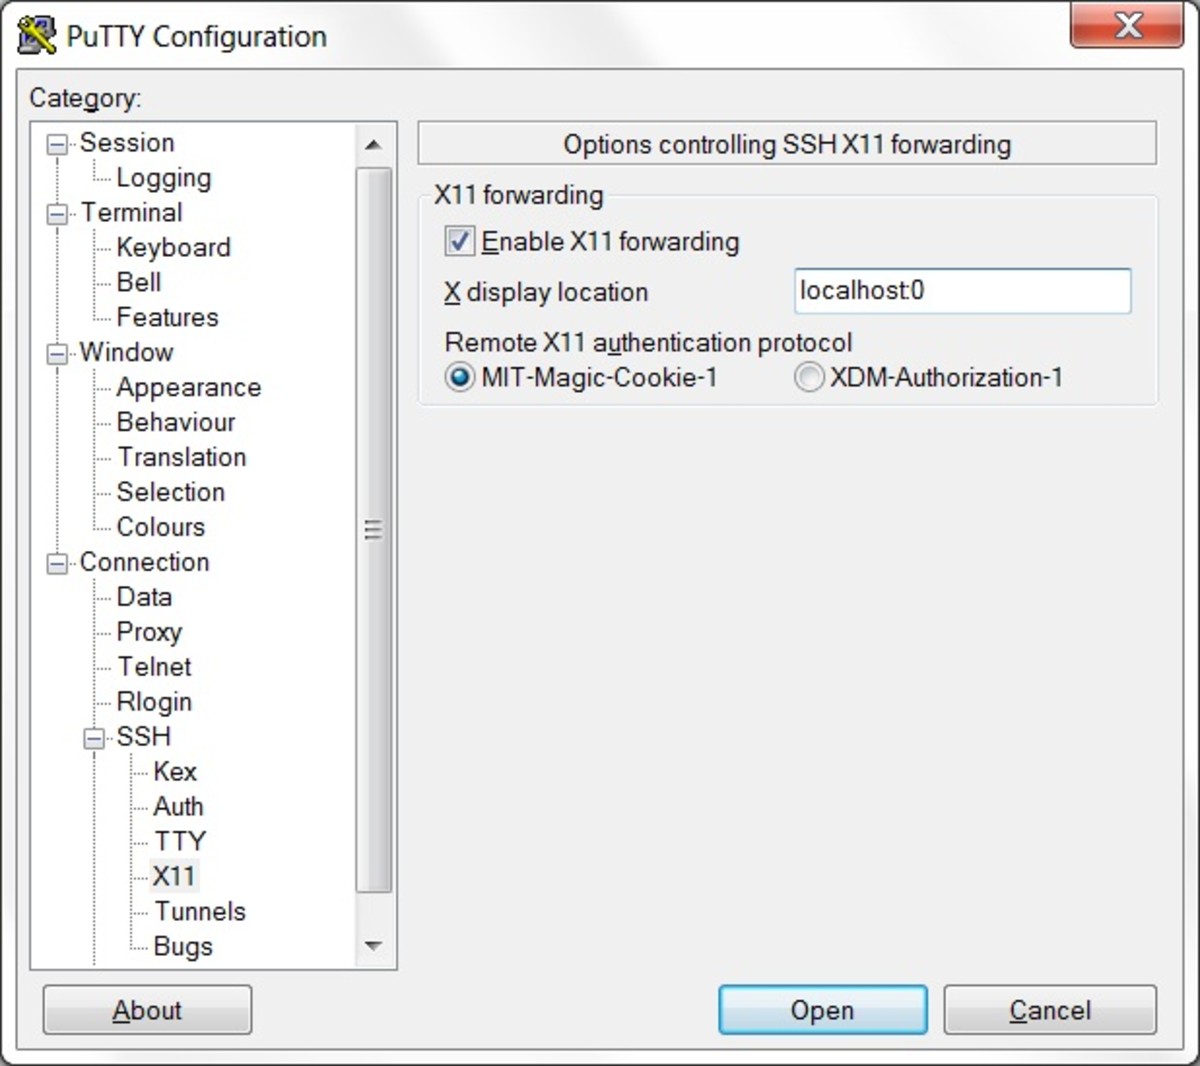 X11 forwarding must be enabled in the Putty settings.